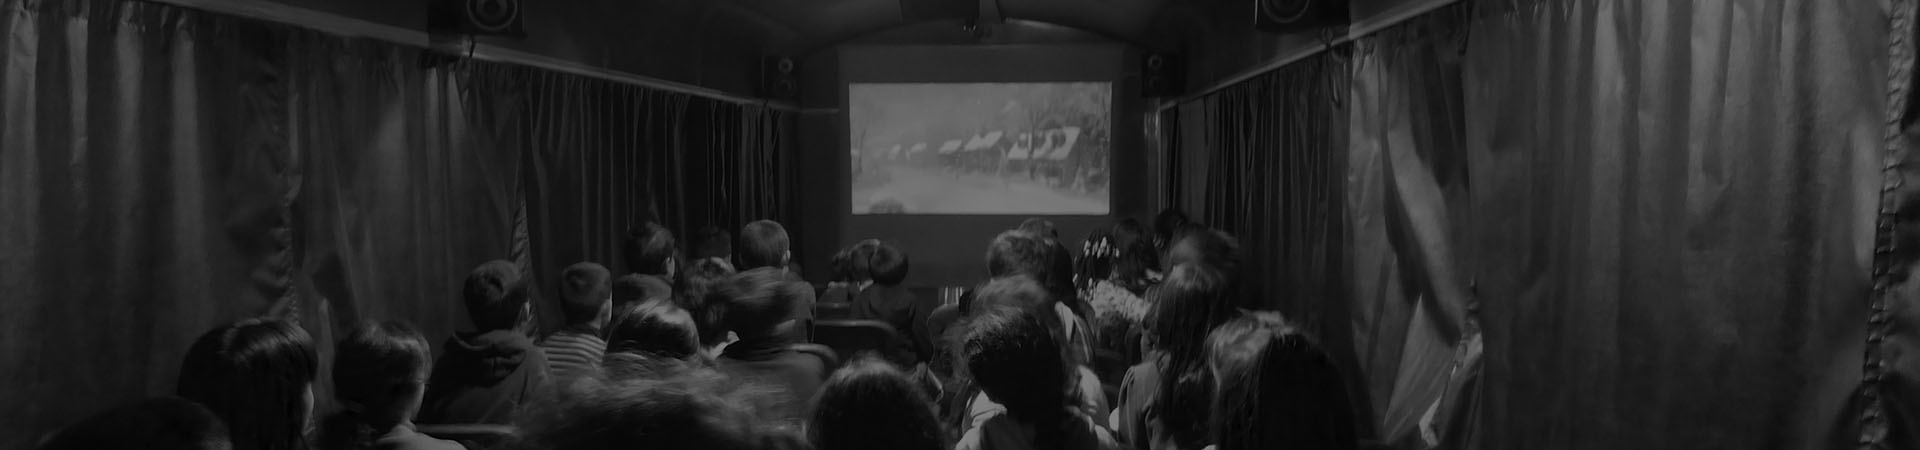 Photo of a group of children watching a movie at the auditorium carriage during a birthday party